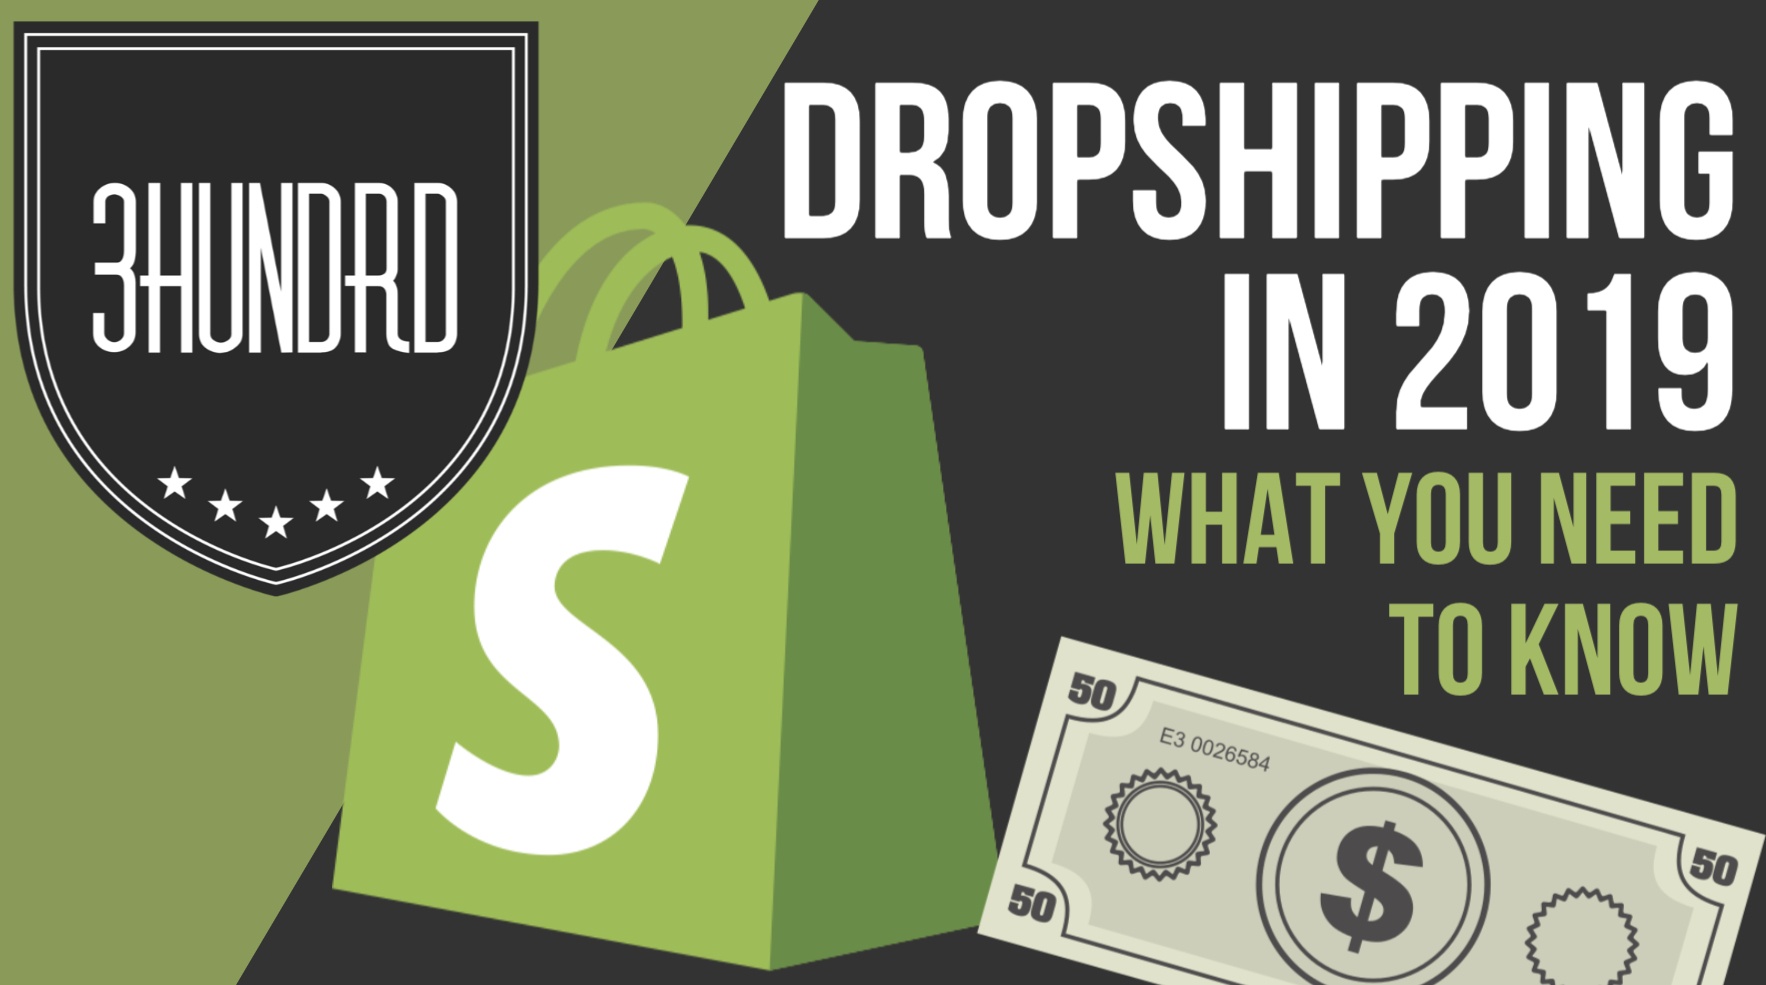 Dropshipping Secrets Revealed: How We Grew a Dropshipping Business to $4.5 Million